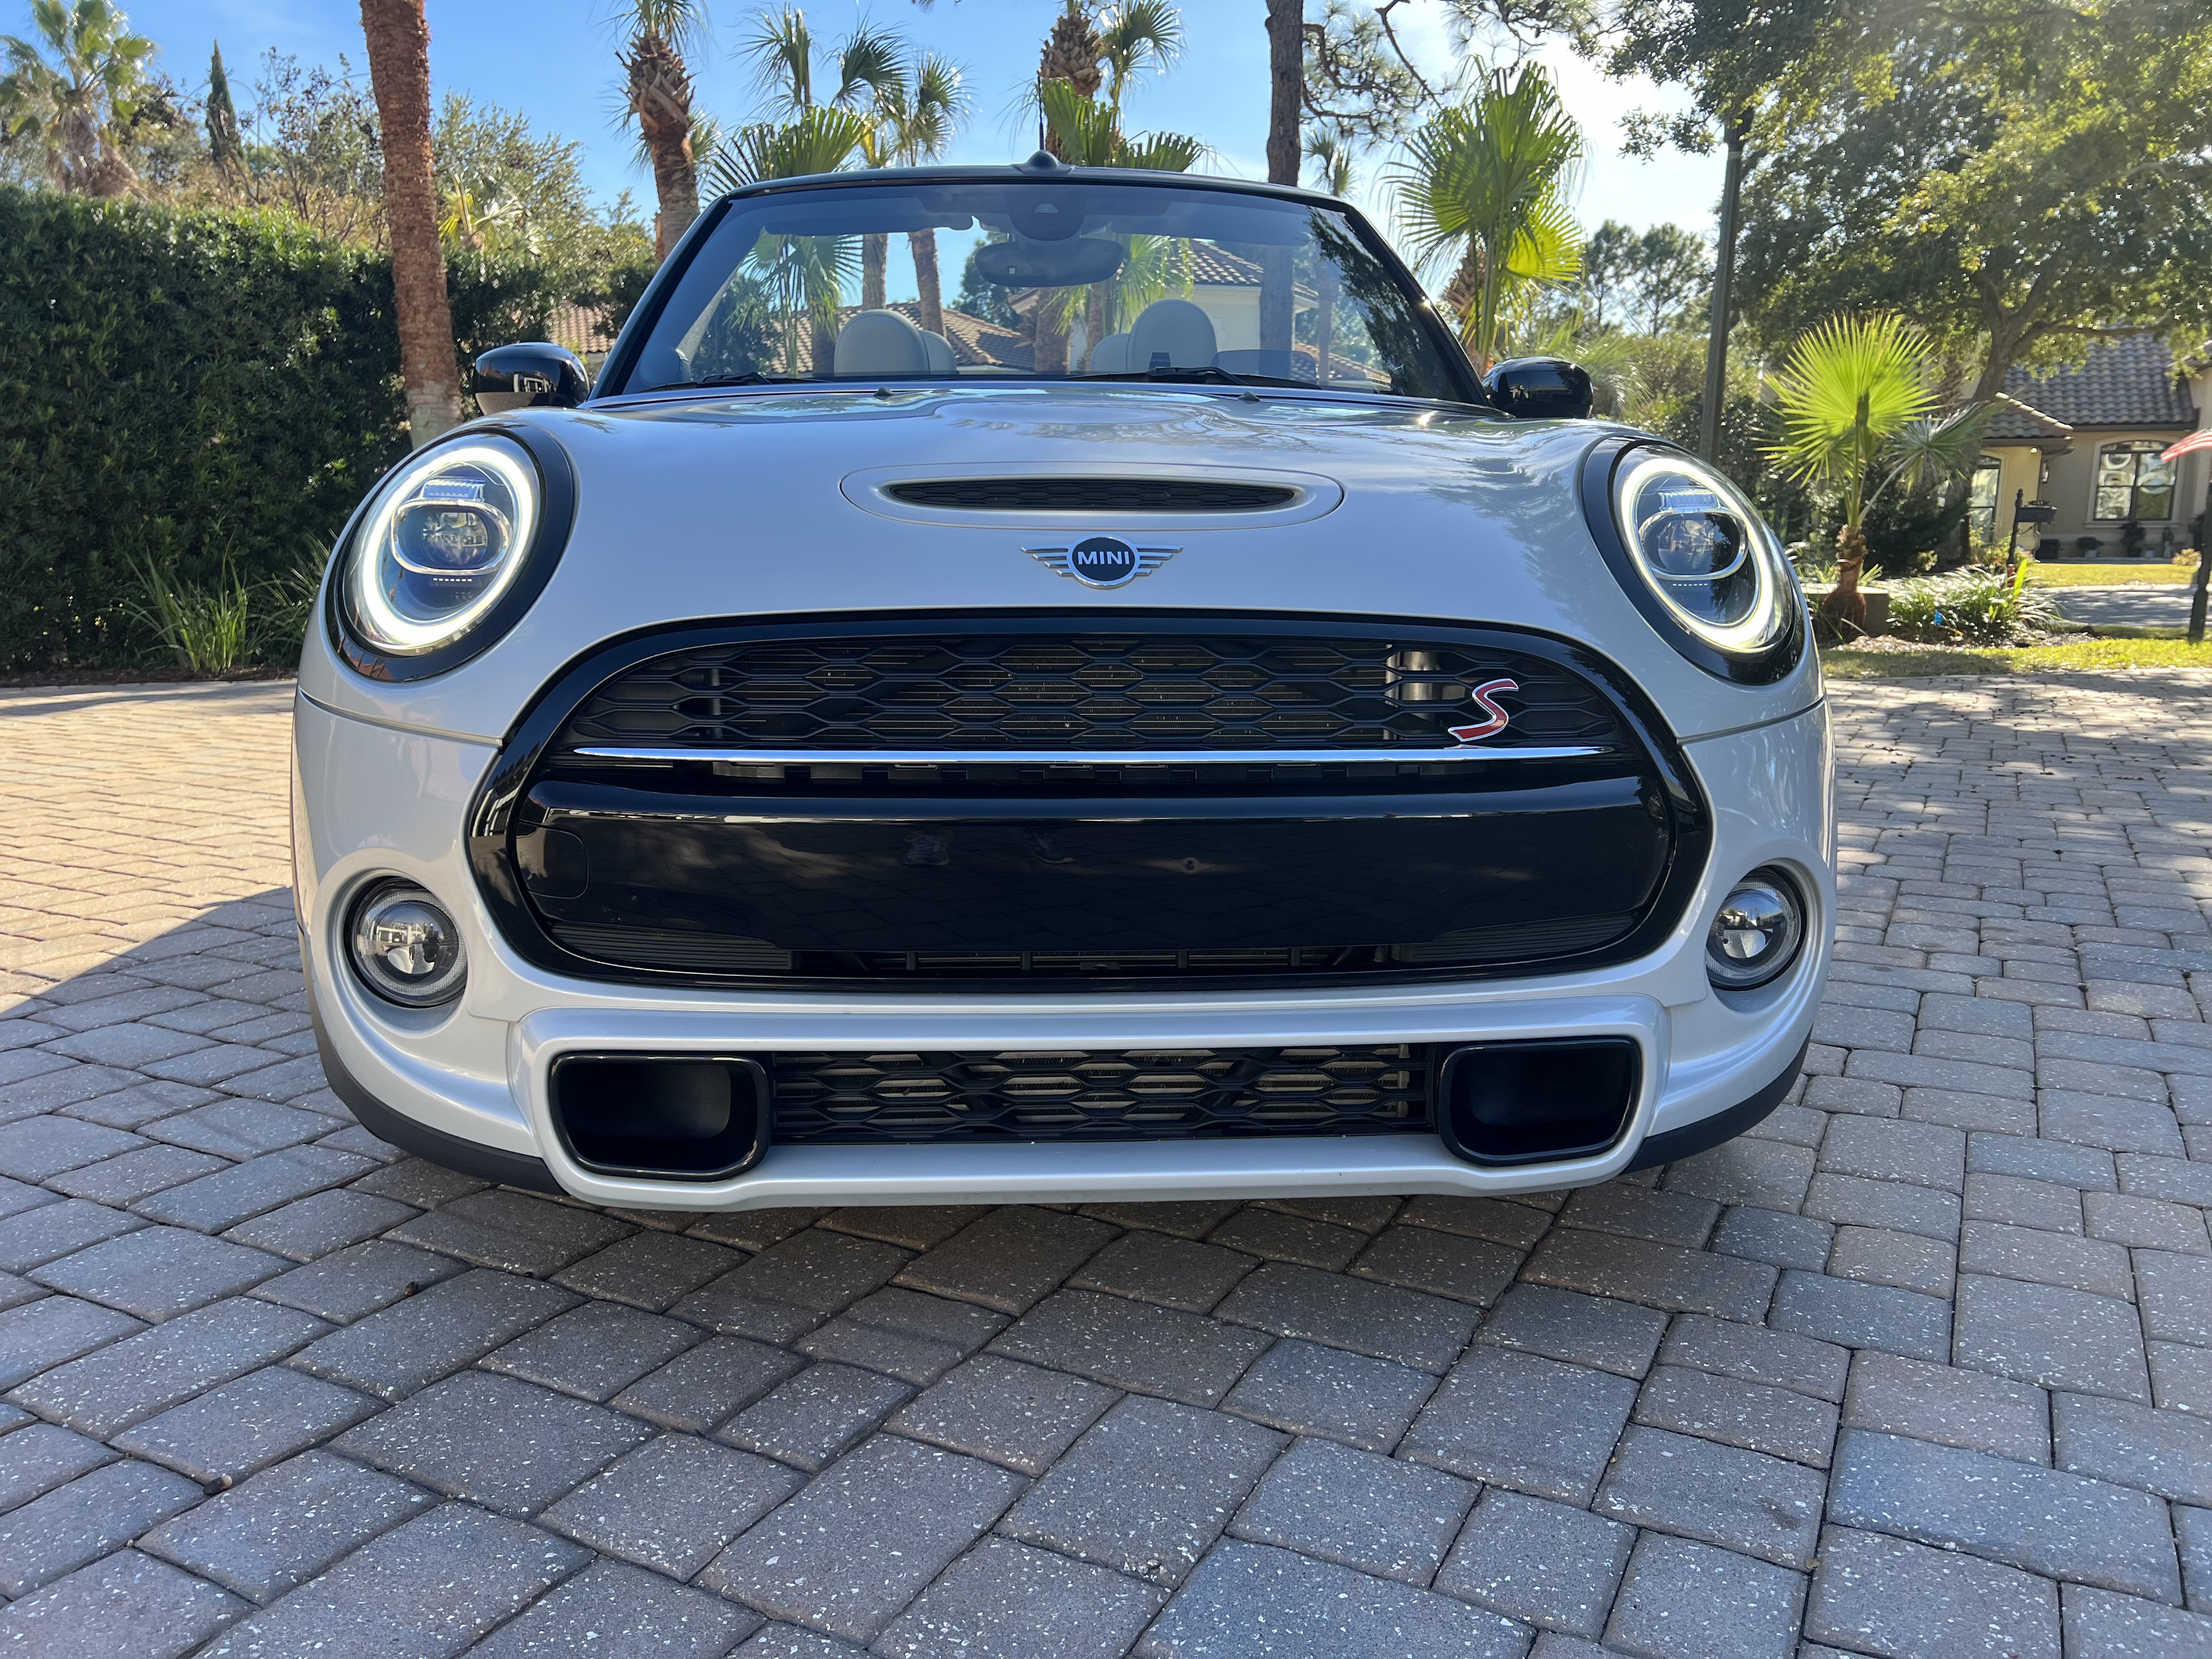 Used MINI Cooper S for Sale Right Now - Autotrader